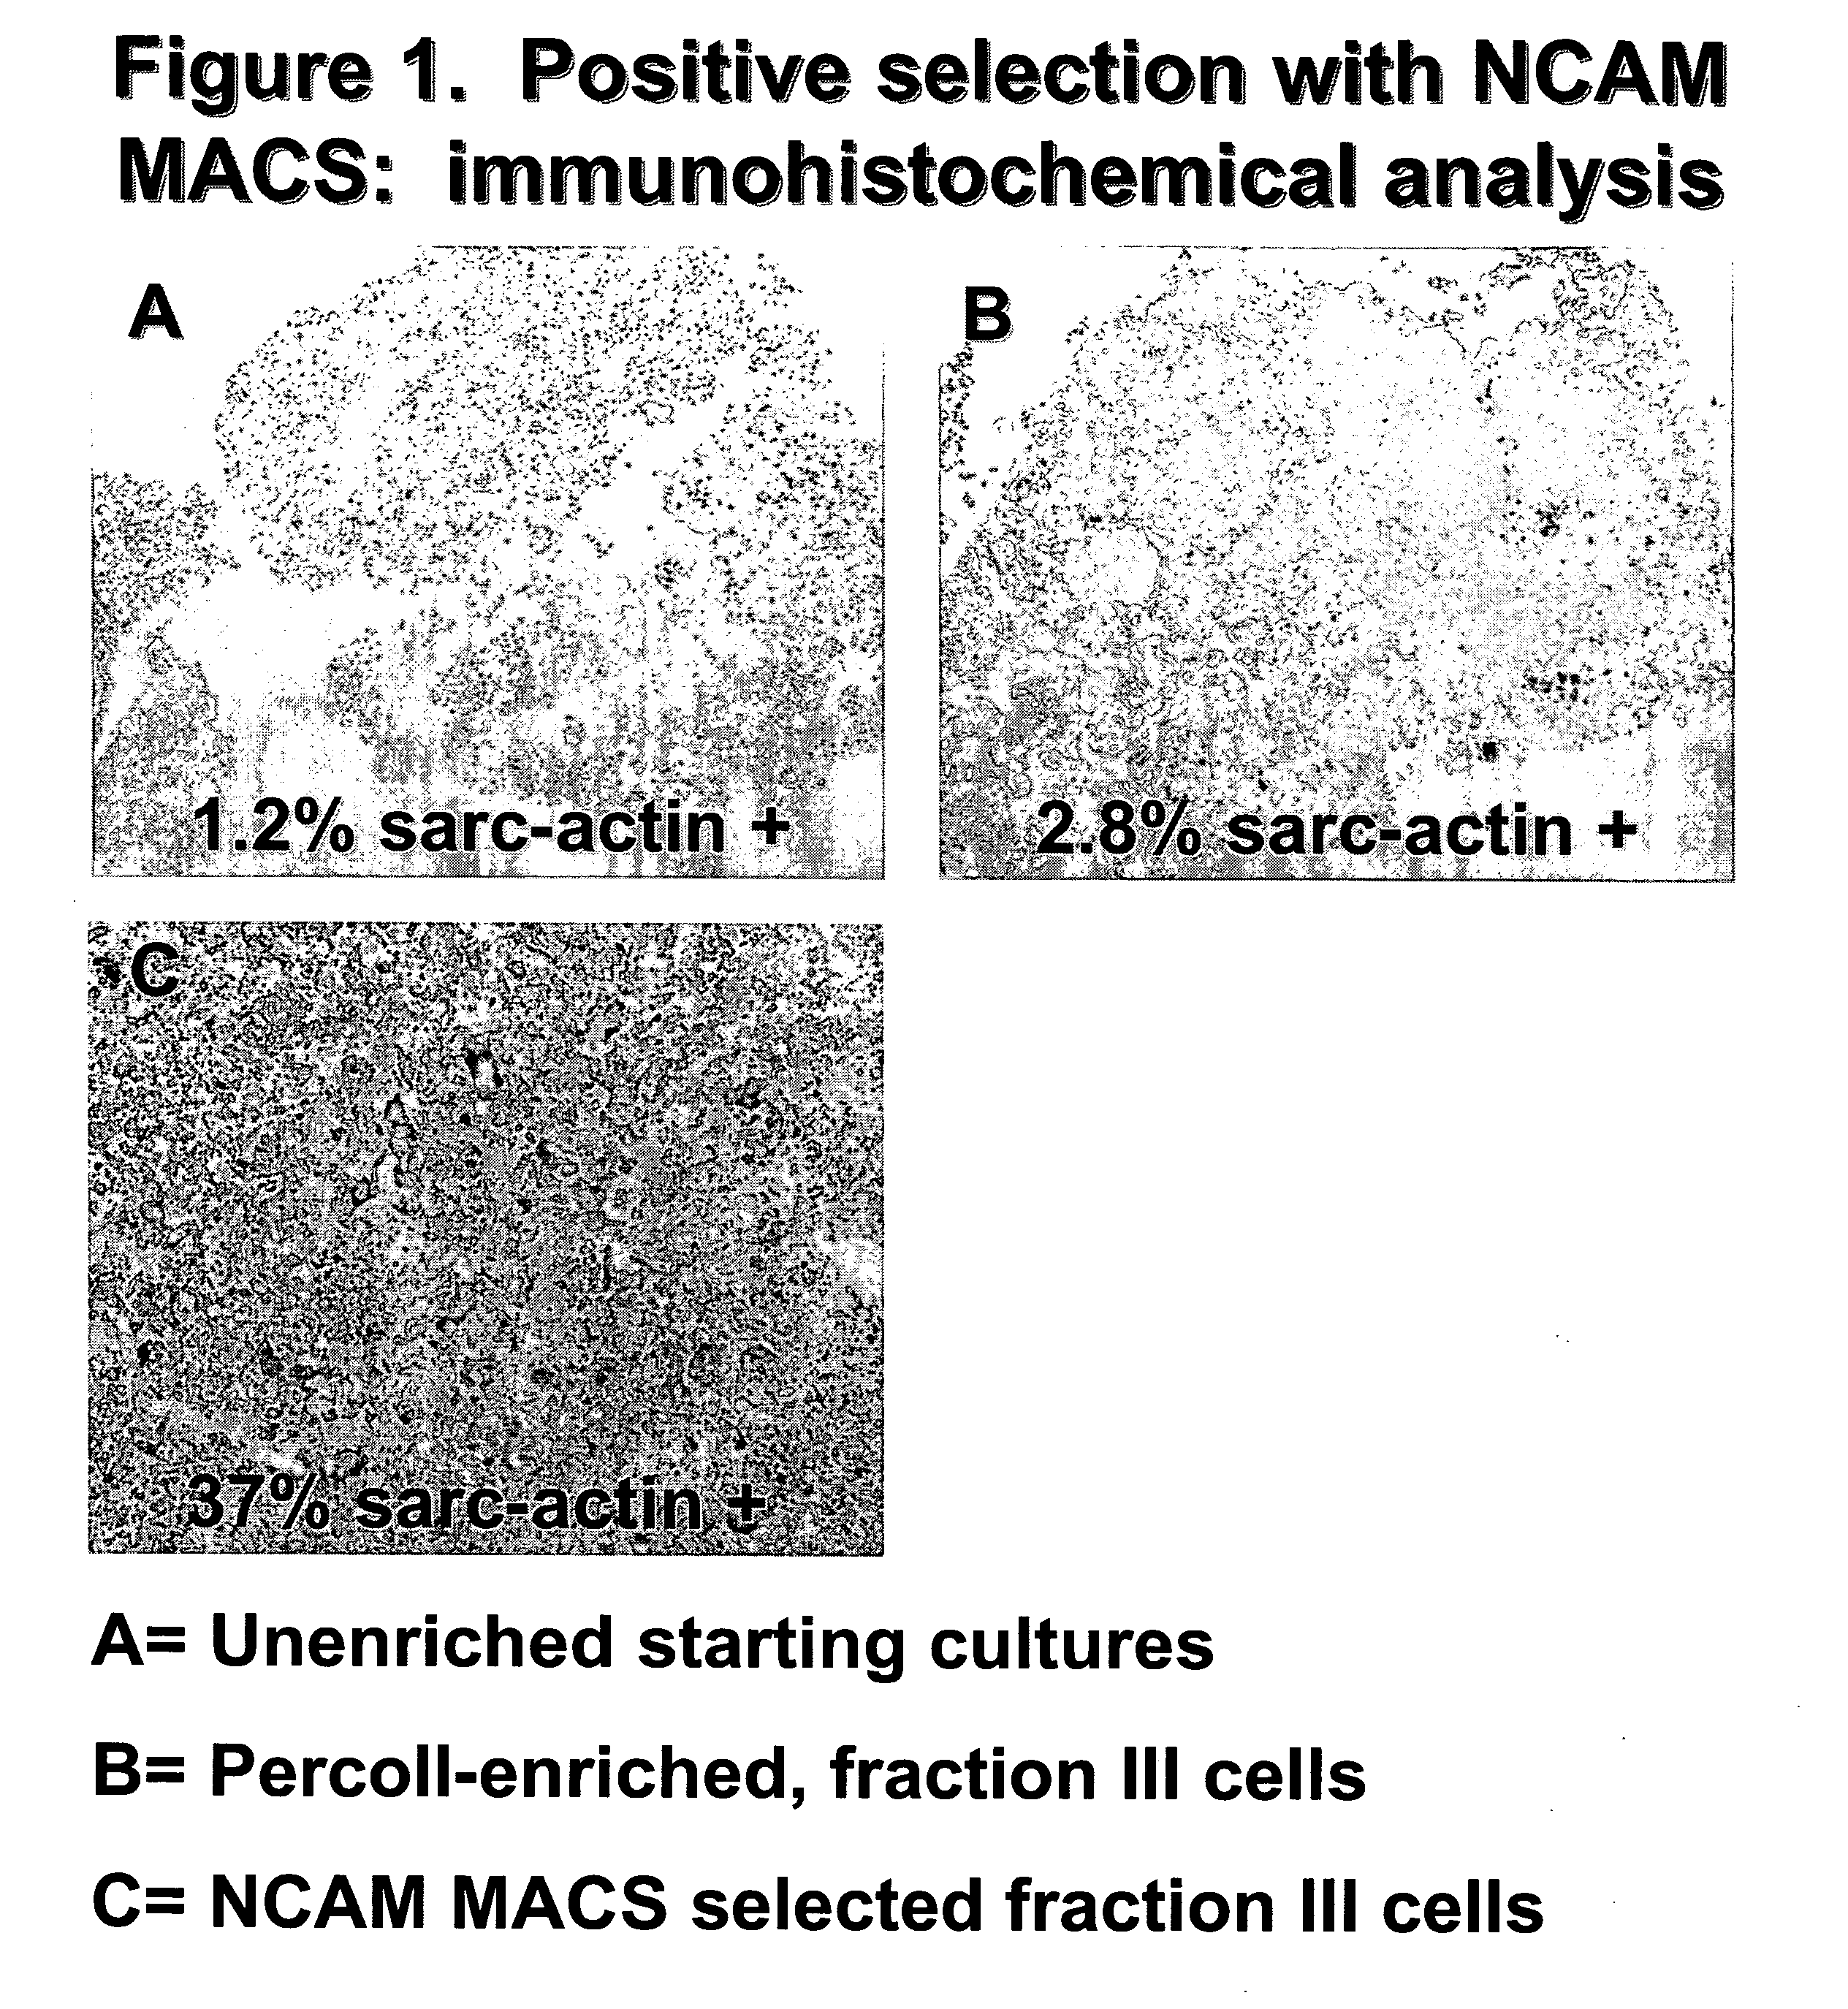 Purified compositions of stem cell derived differentiating cells